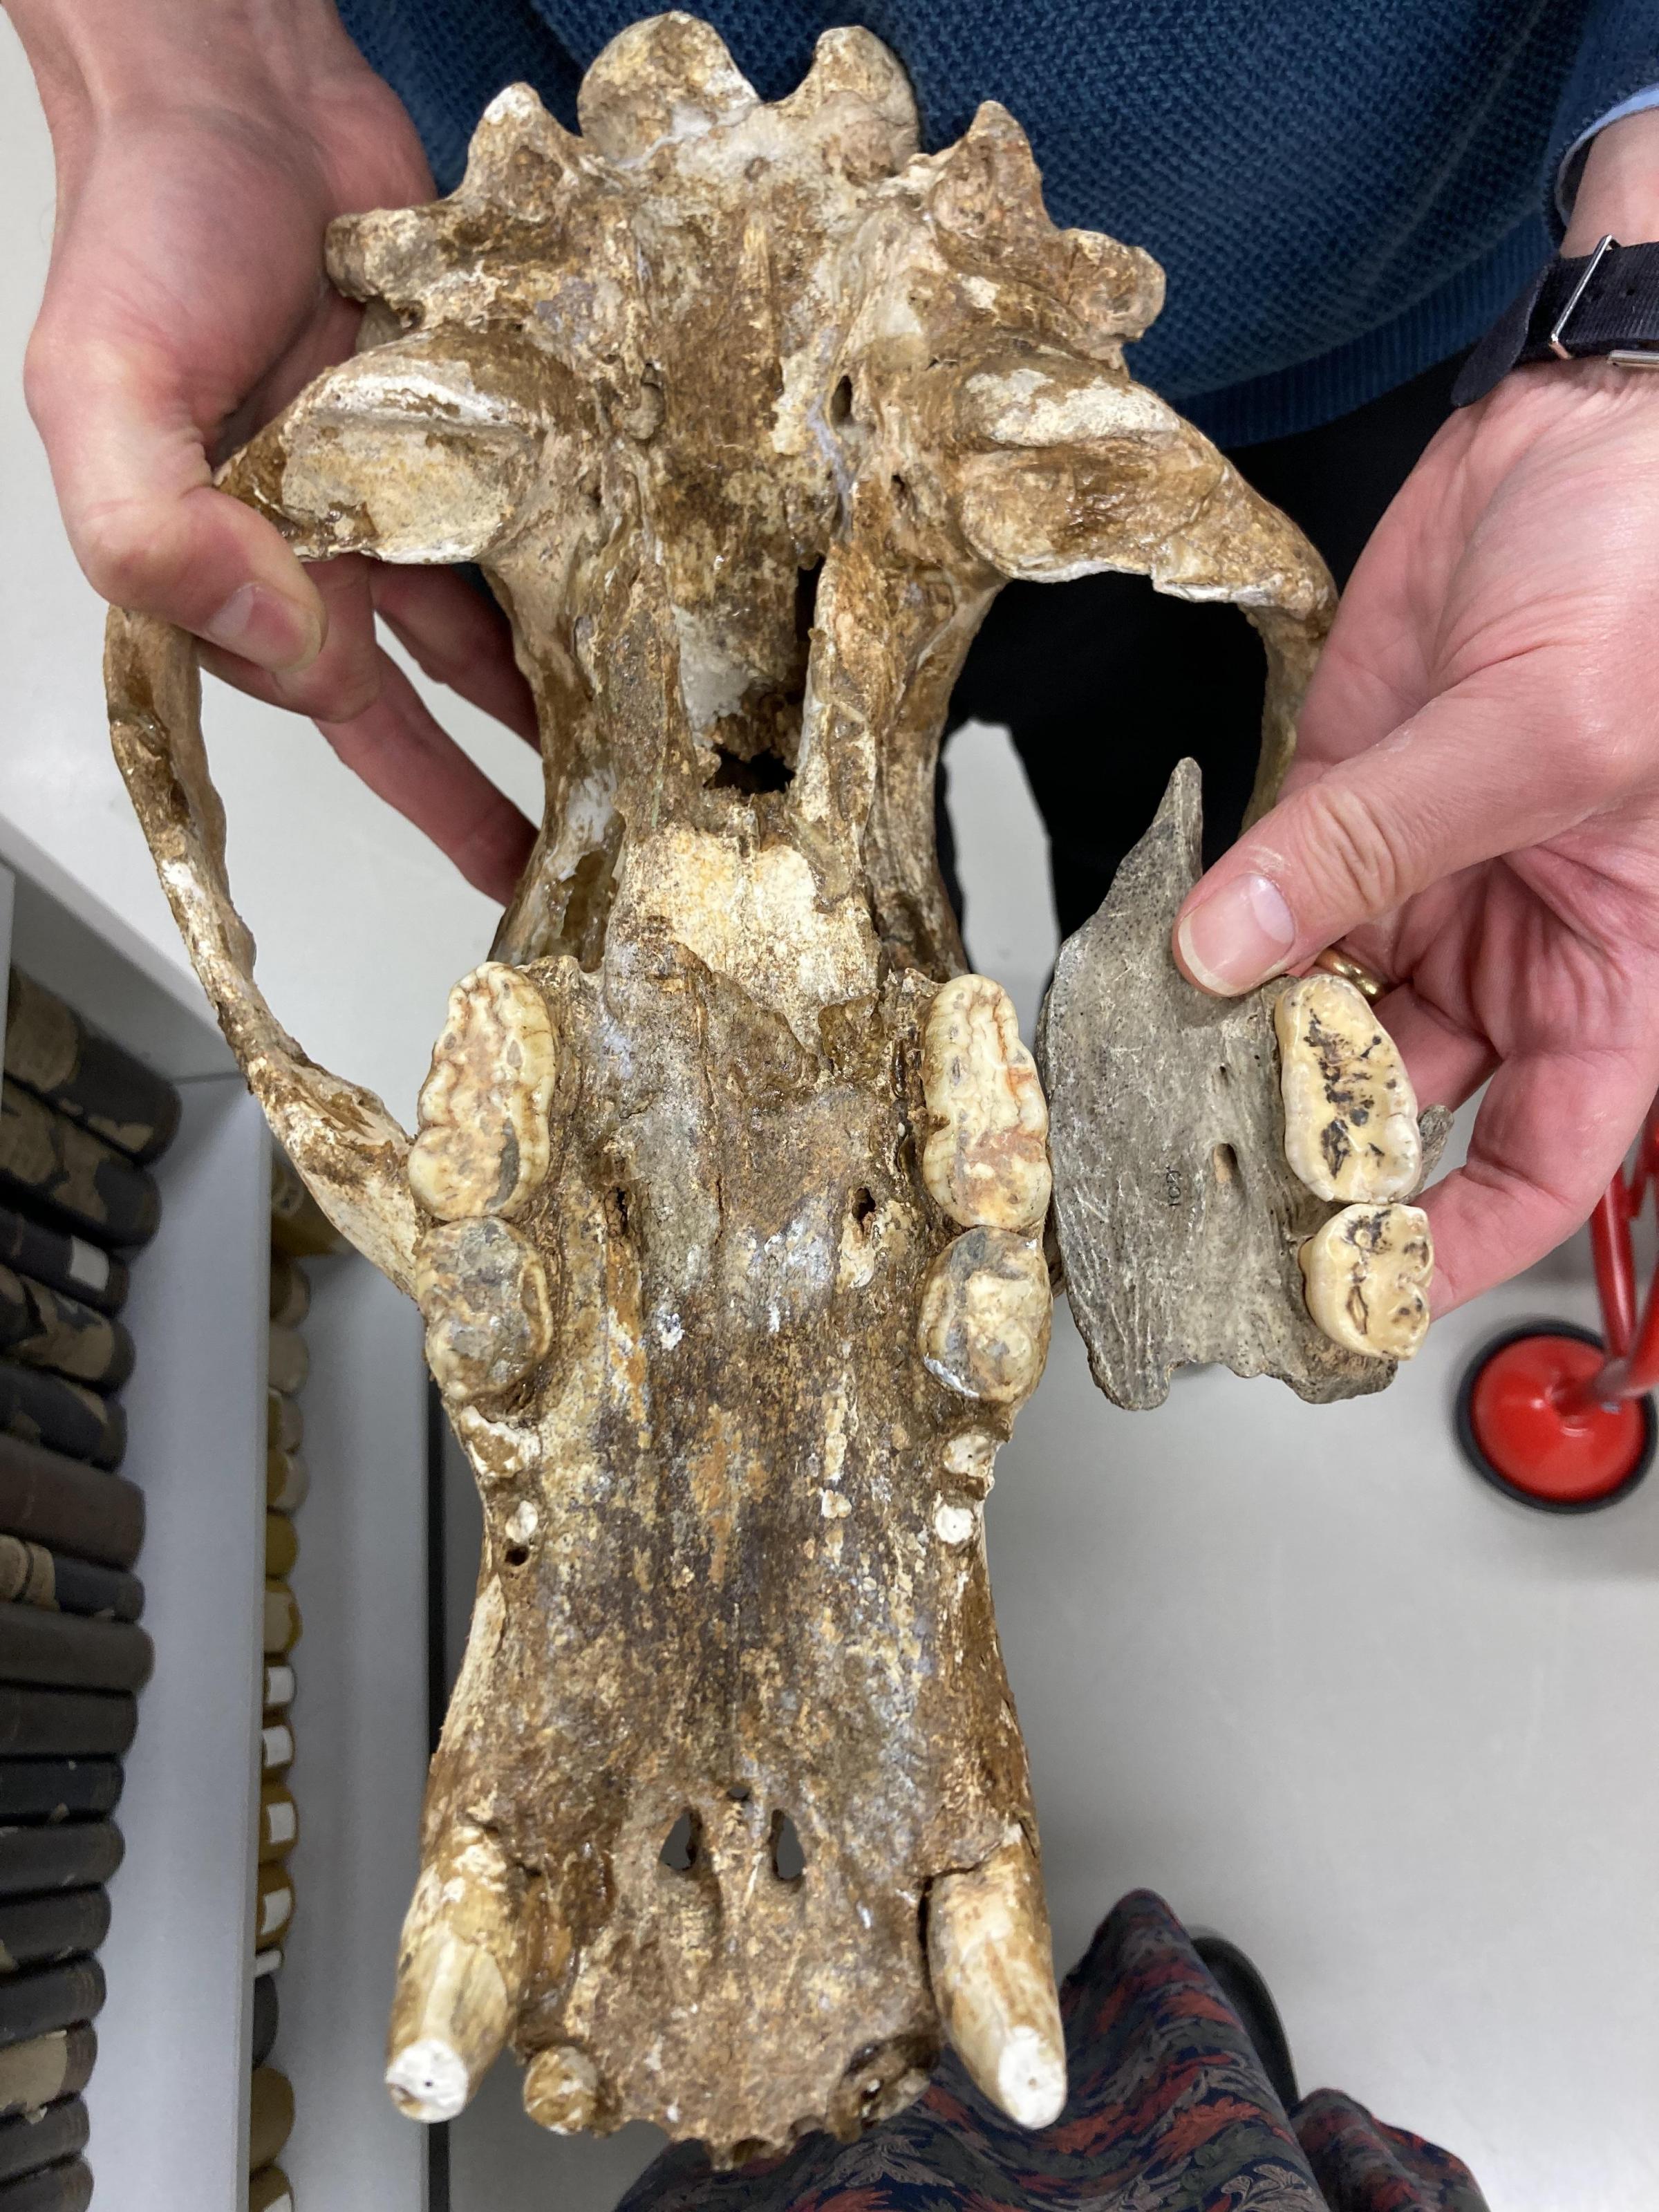 Dr Andrew Kitchener (Principal Curator of Vertebrate Biology, National Museum of Scotland) holds the complete maxilla (upper jaw) of a cave bear, comparing it to a sizeable fragment of bear maxilla from the Assynt Bone Caves. Radiocarbon dating has